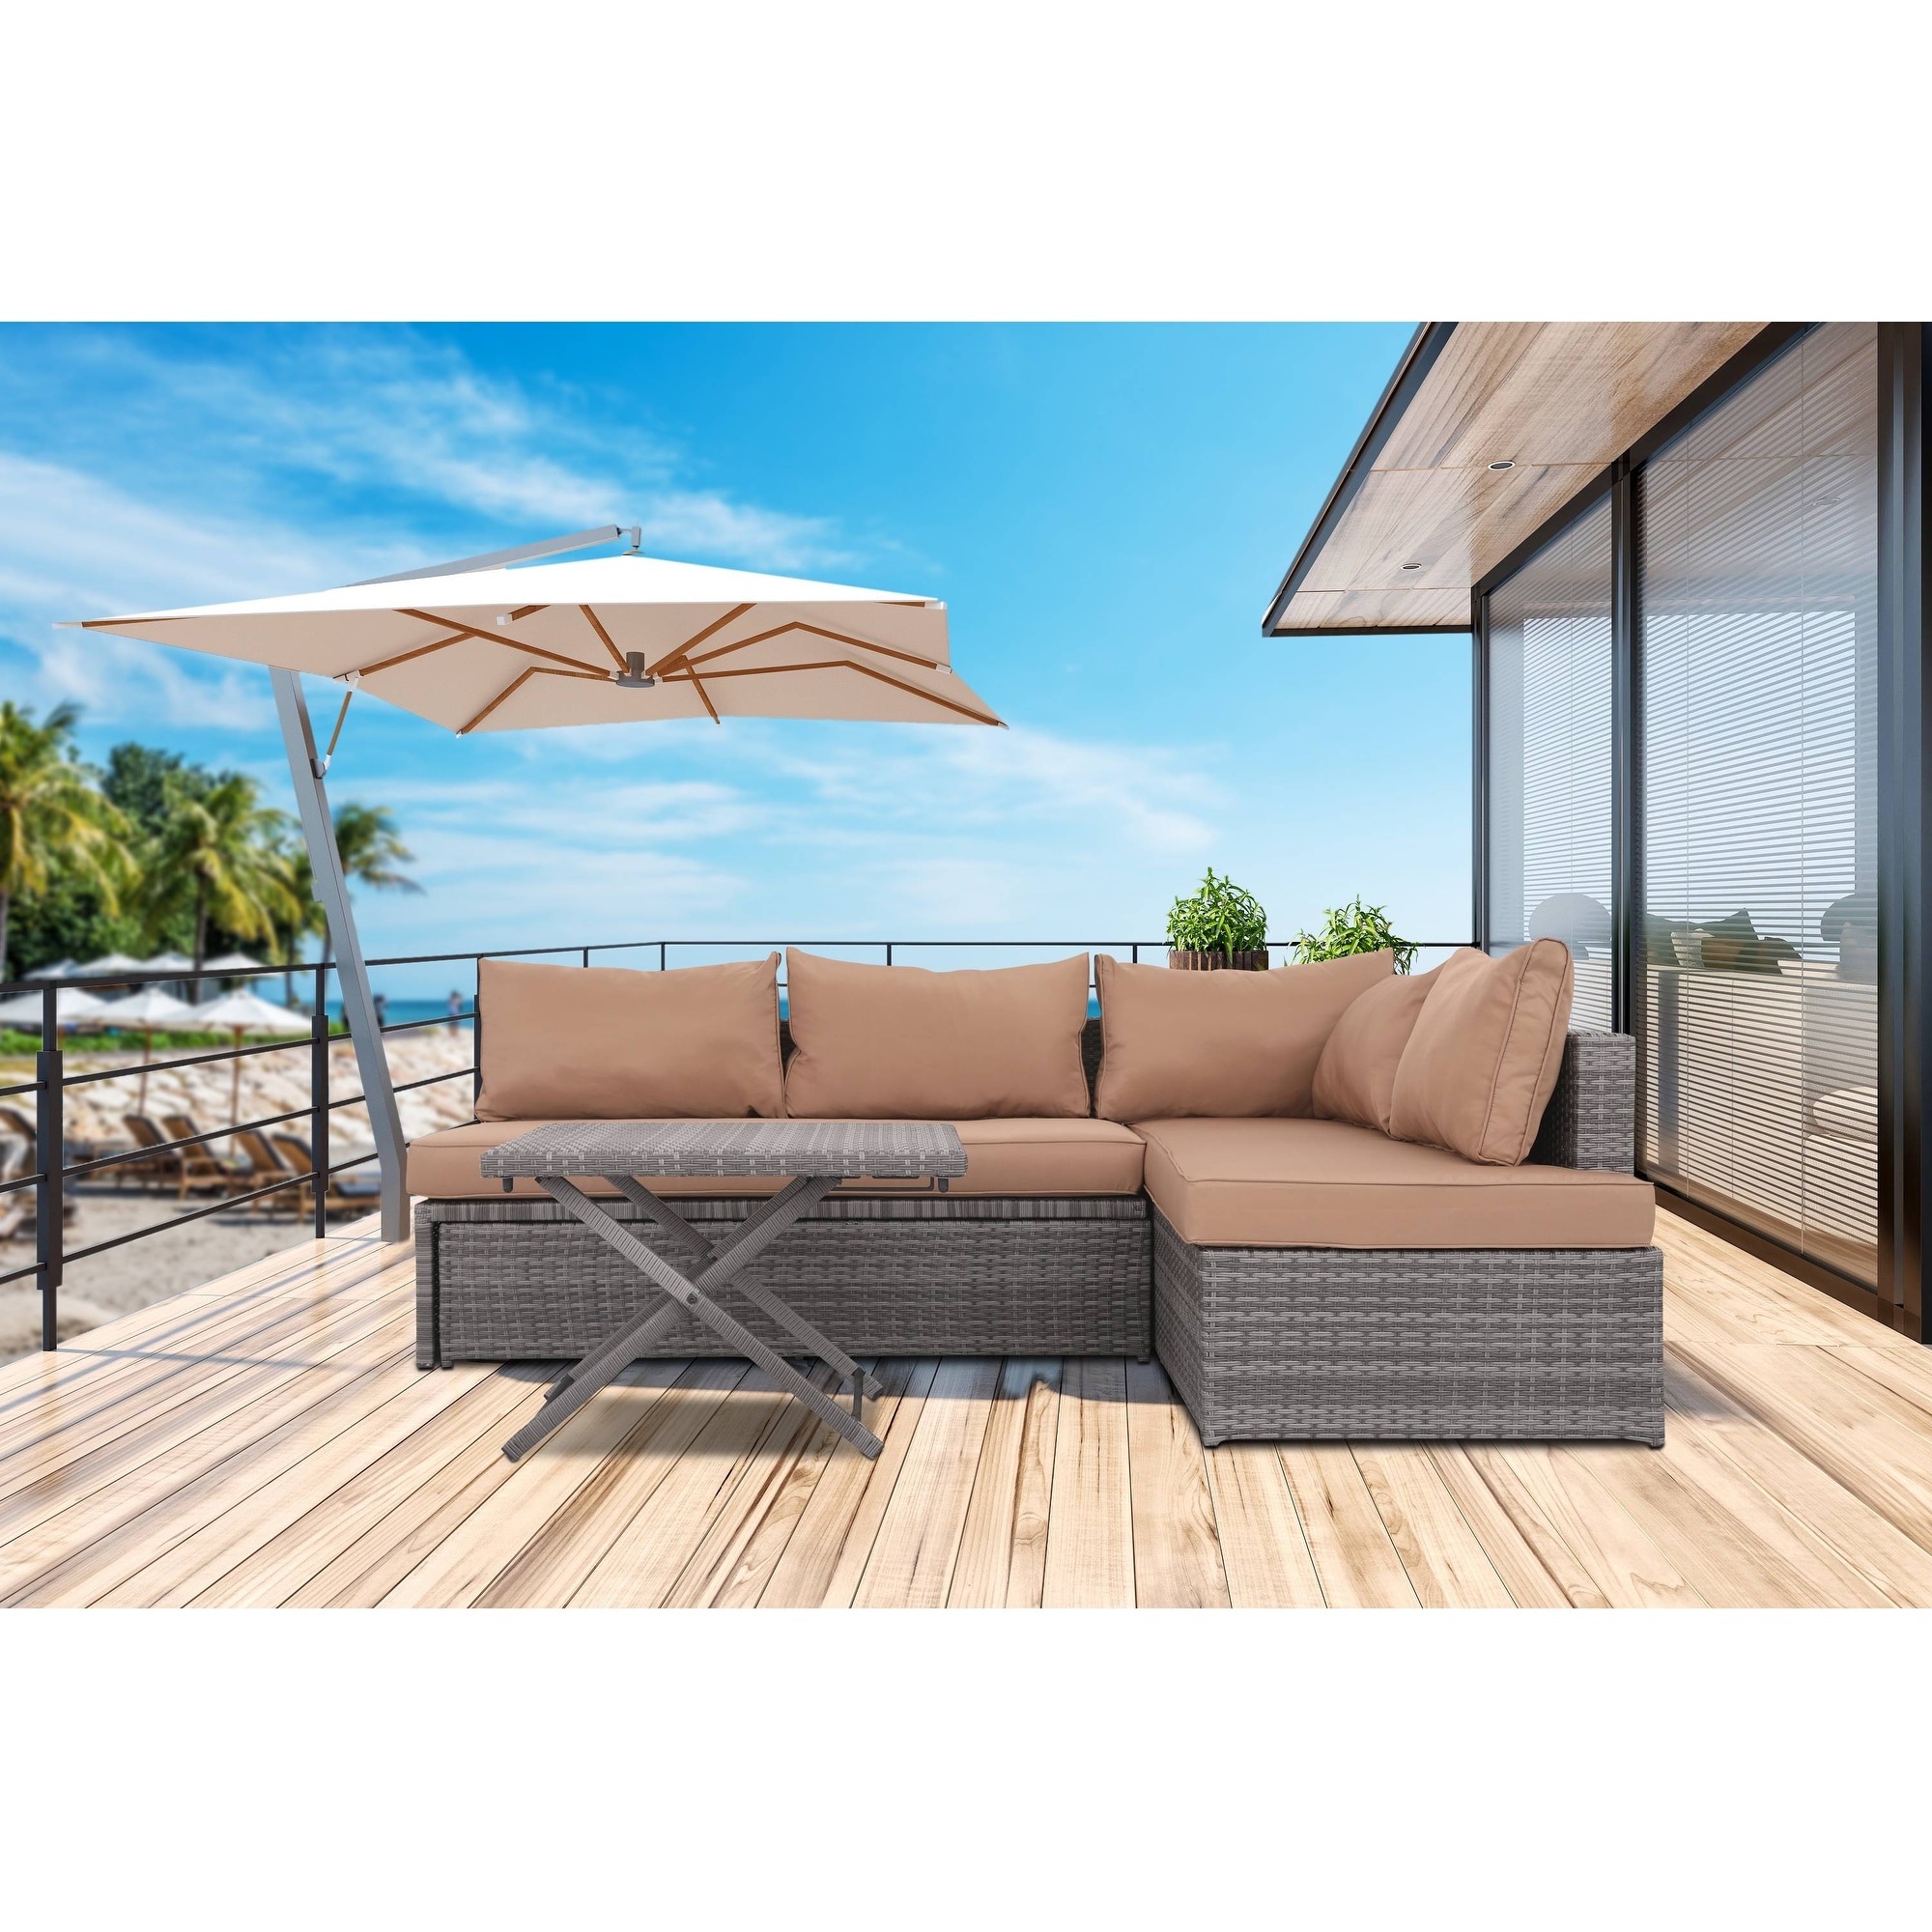 3-piece Patio Furniture Wicker Sectional Sofa Set With Cushions